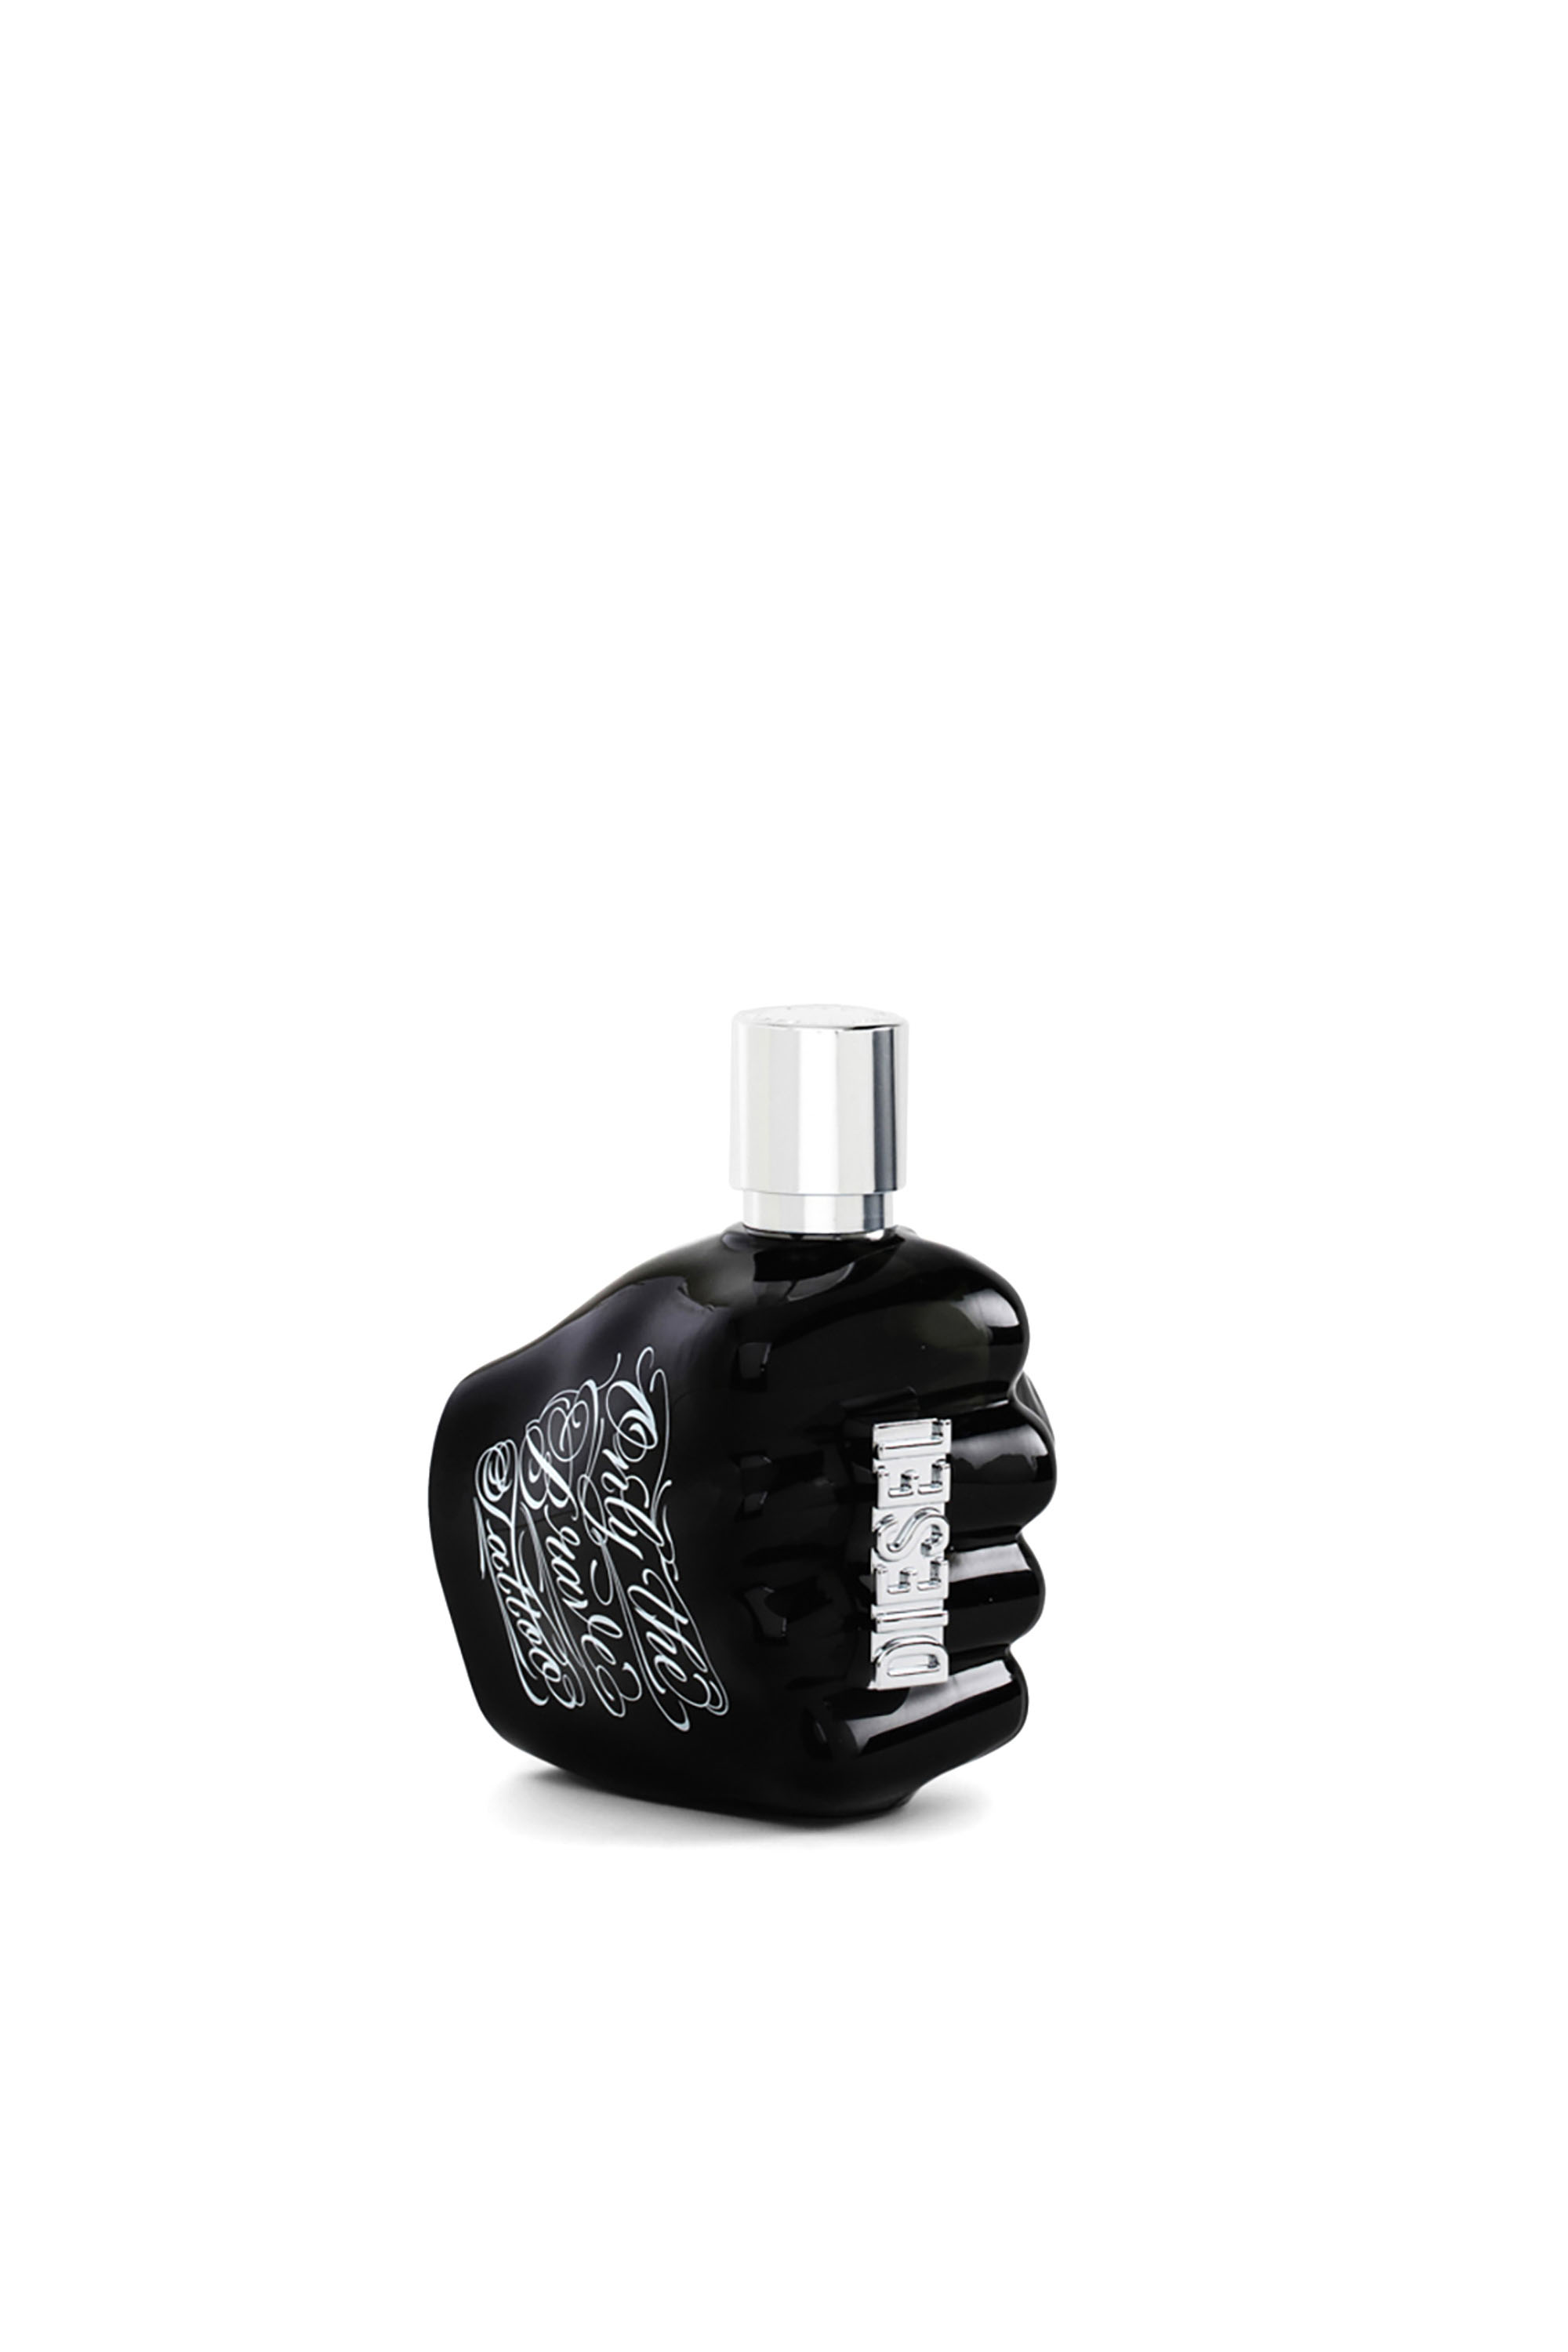 ONLY THE BRAVE TATTOO 75ML